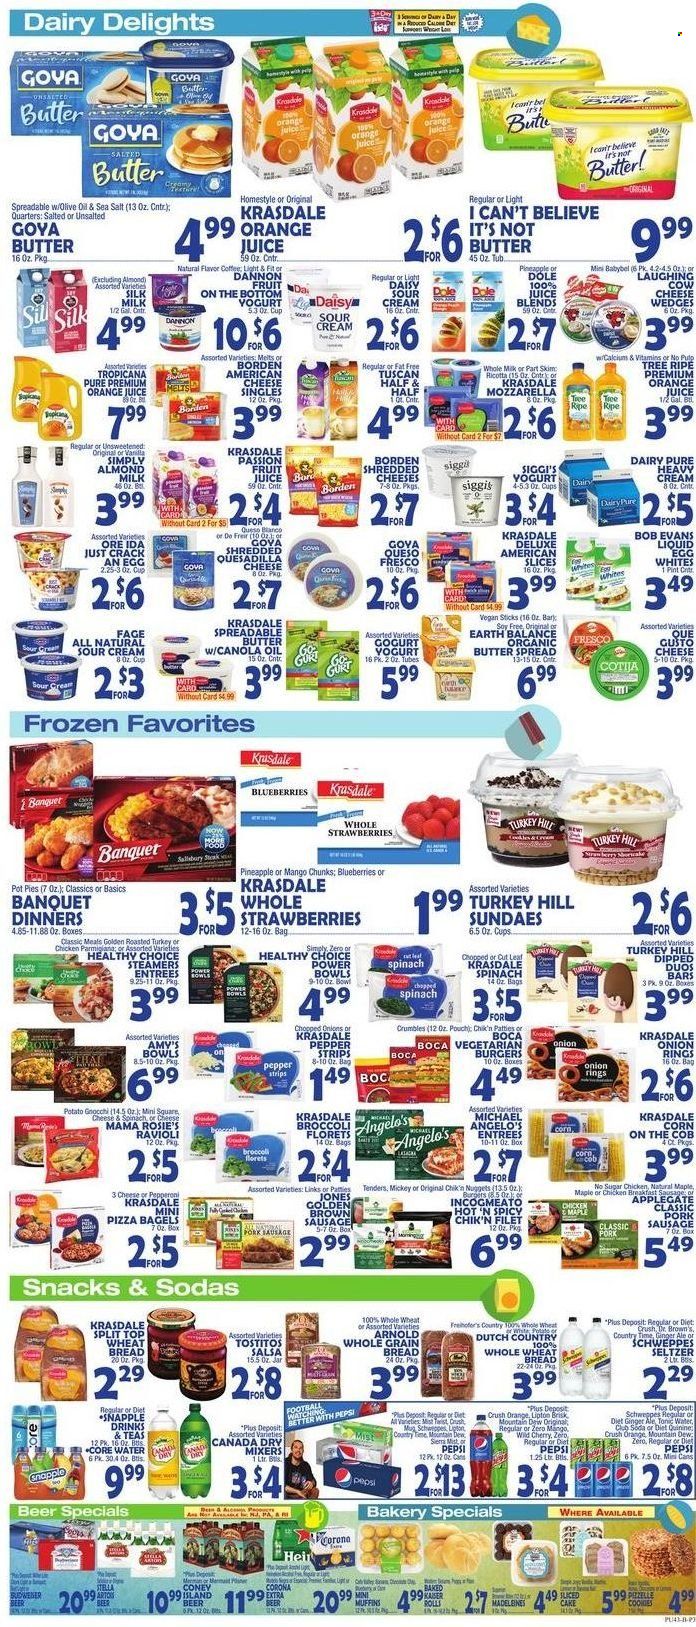 thumbnail - Bravo Supermarkets Flyer - 12/02/2022 - 12/08/2022 - Sales products - bagels, wheat bread, cake, pot pie, muffin, broccoli, corn, Dole, blueberries, strawberries, cherries, gnocchi, ravioli, pizza, onion rings, nuggets, hamburger, veggie burger, Healthy Choice, Bob Evans, sausage, pork sausage, ricotta, sandwich slices, queso fresco, The Laughing Cow, Babybel, yoghurt, Dannon, almond milk, milk, Silk, salted butter, I Can't Believe It's Not Butter, sour cream, Mickey Mouse, strips, parmigiana, Ore-Ida, cookies, snack, Tostitos, Goya, salsa, canola oil, olive oil, oil, Canada Dry, ginger ale, Mountain Dew, Schweppes, Pepsi, orange juice, juice, Lipton, tonic, Diet Pepsi, Snapple, Dr. Brown's, Country Time, Club Soda, seltzer water, coffee, beer, Corona Extra, steak, Half and half. Page 4.